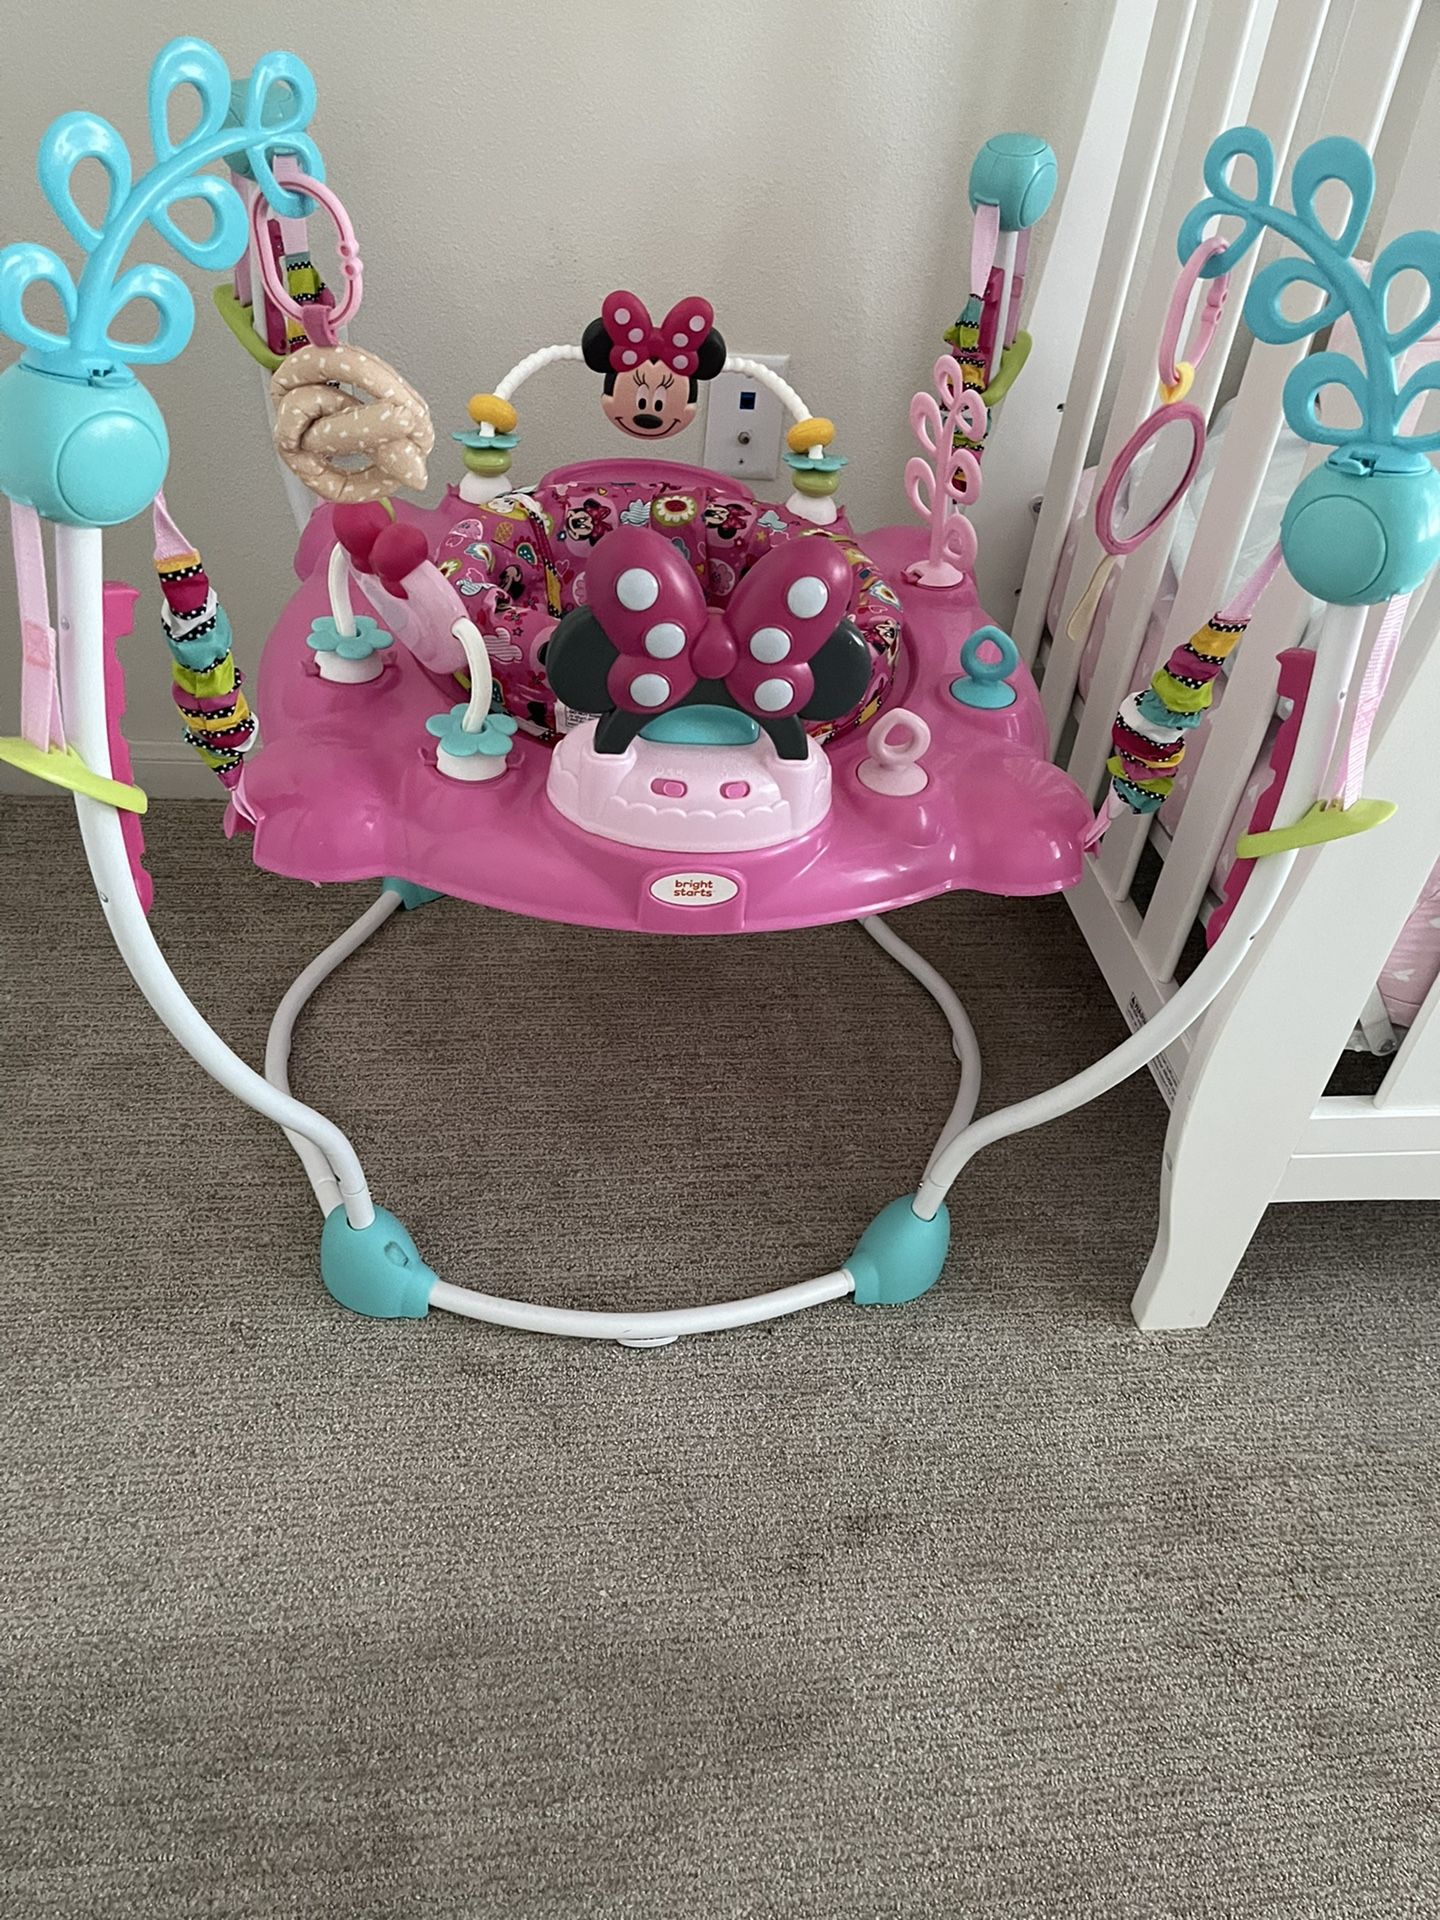 Used Once Only - Lots Of Baby Stuff For Sale